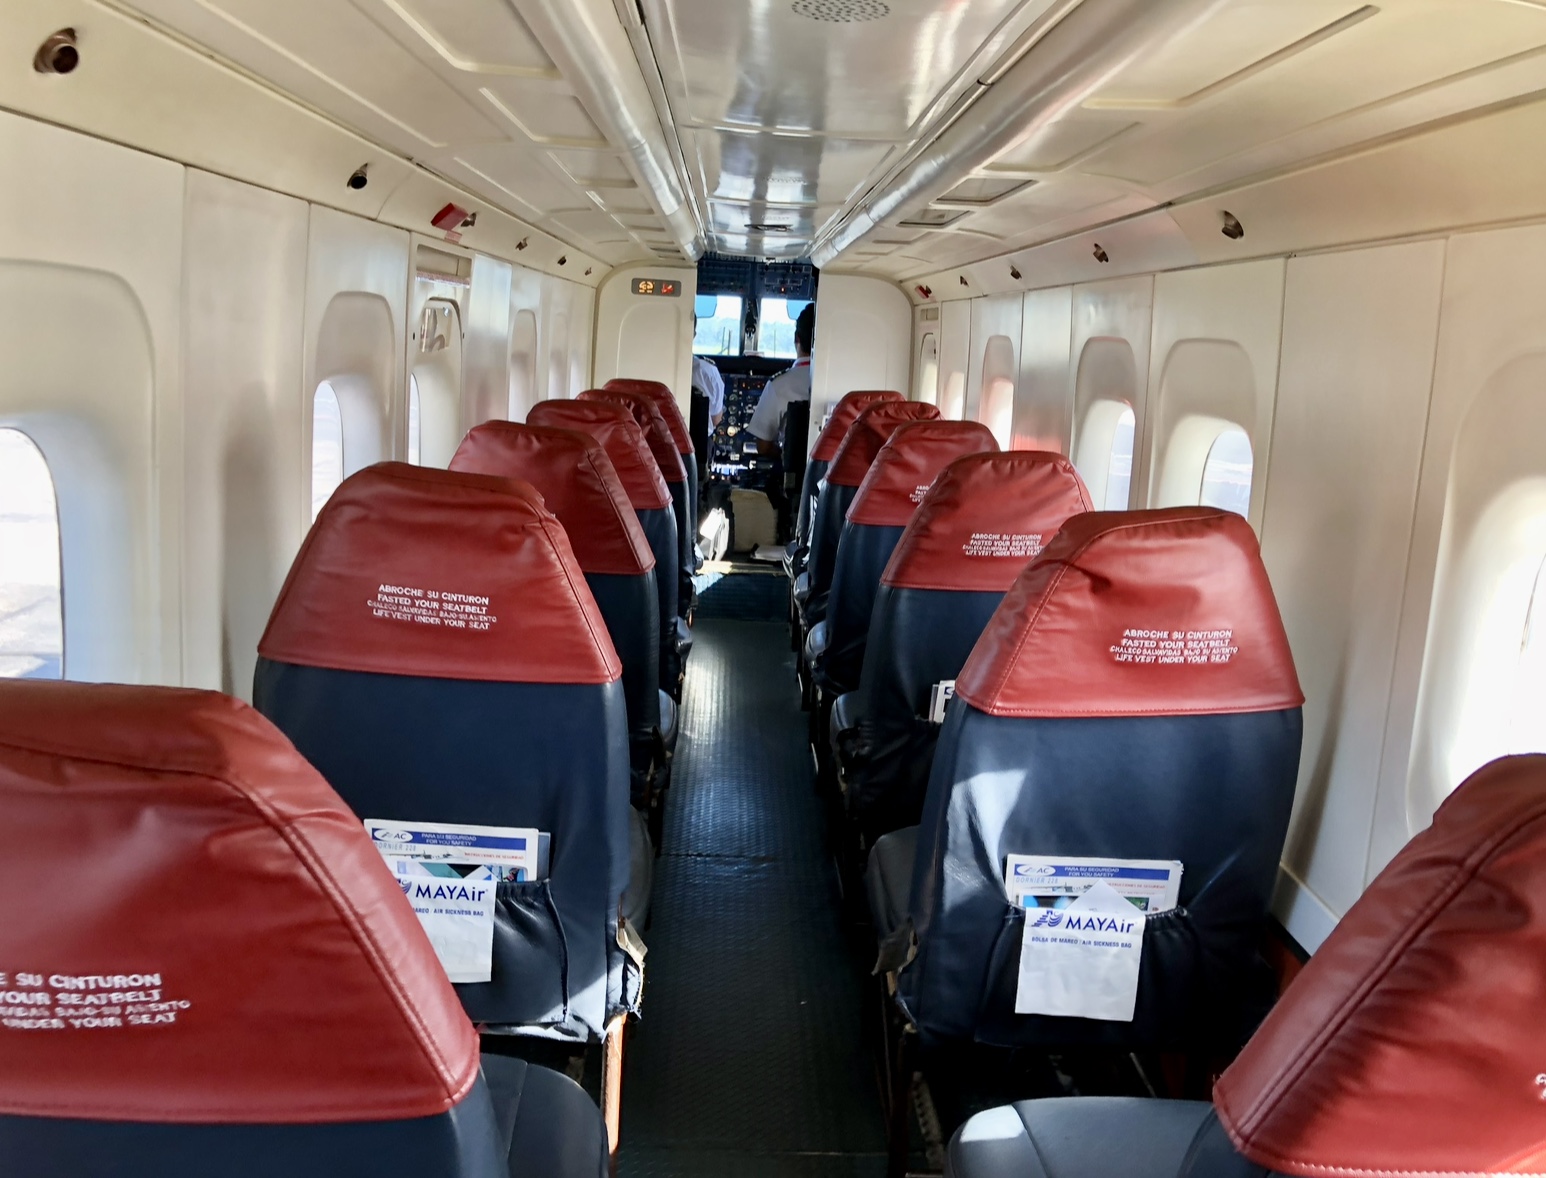 rows of seats on a plane